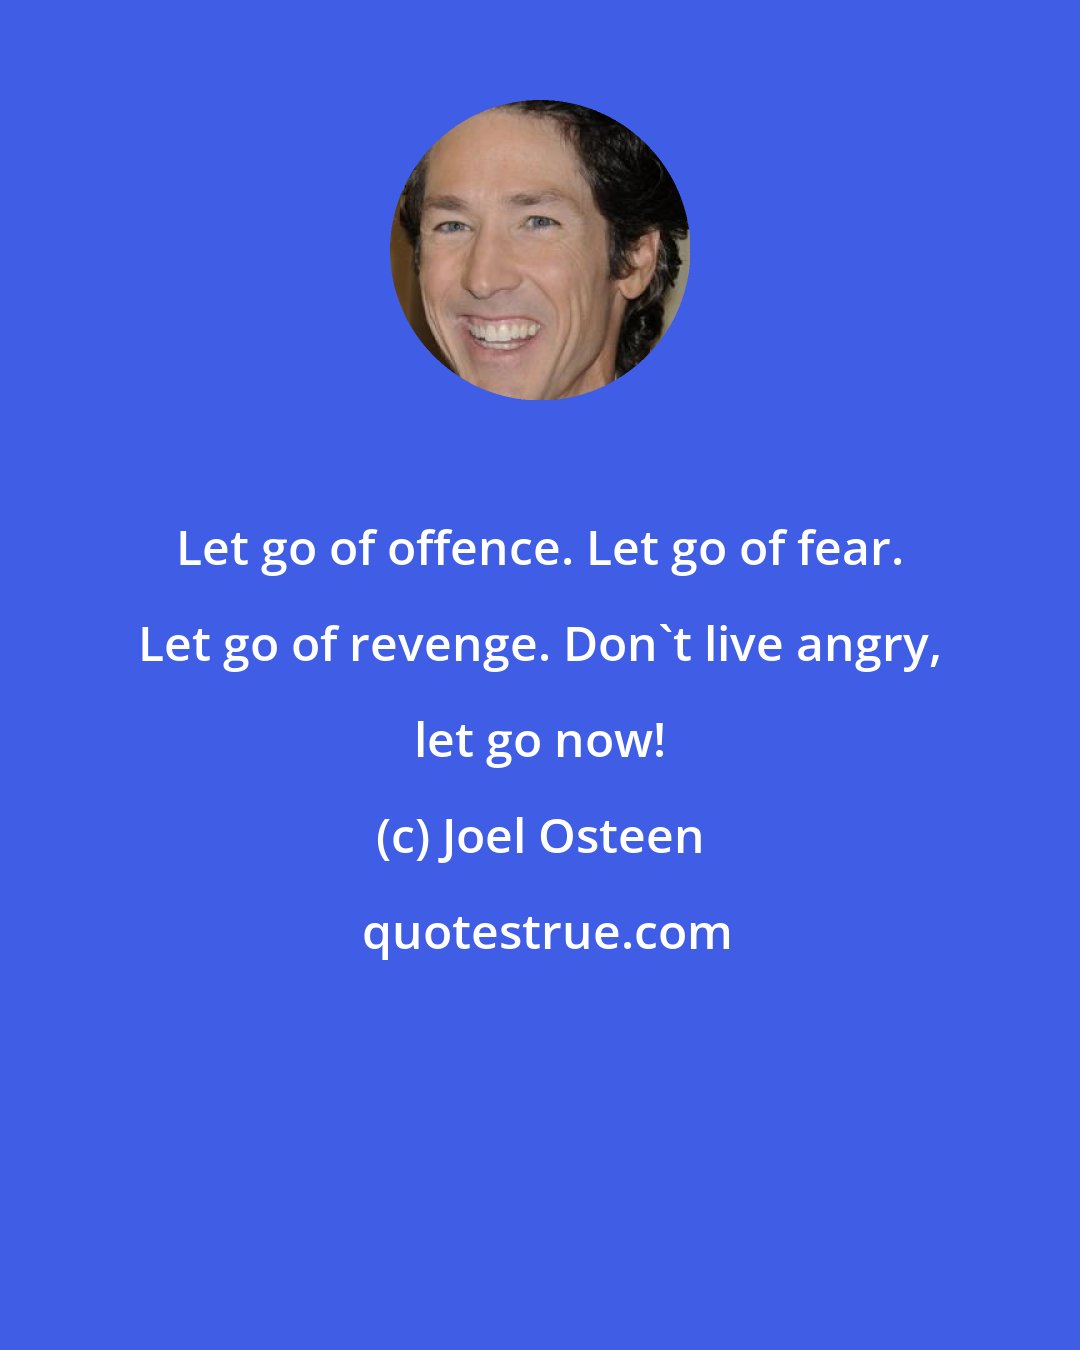 Joel Osteen: Let go of offence. Let go of fear. Let go of revenge. Don't live angry, let go now!